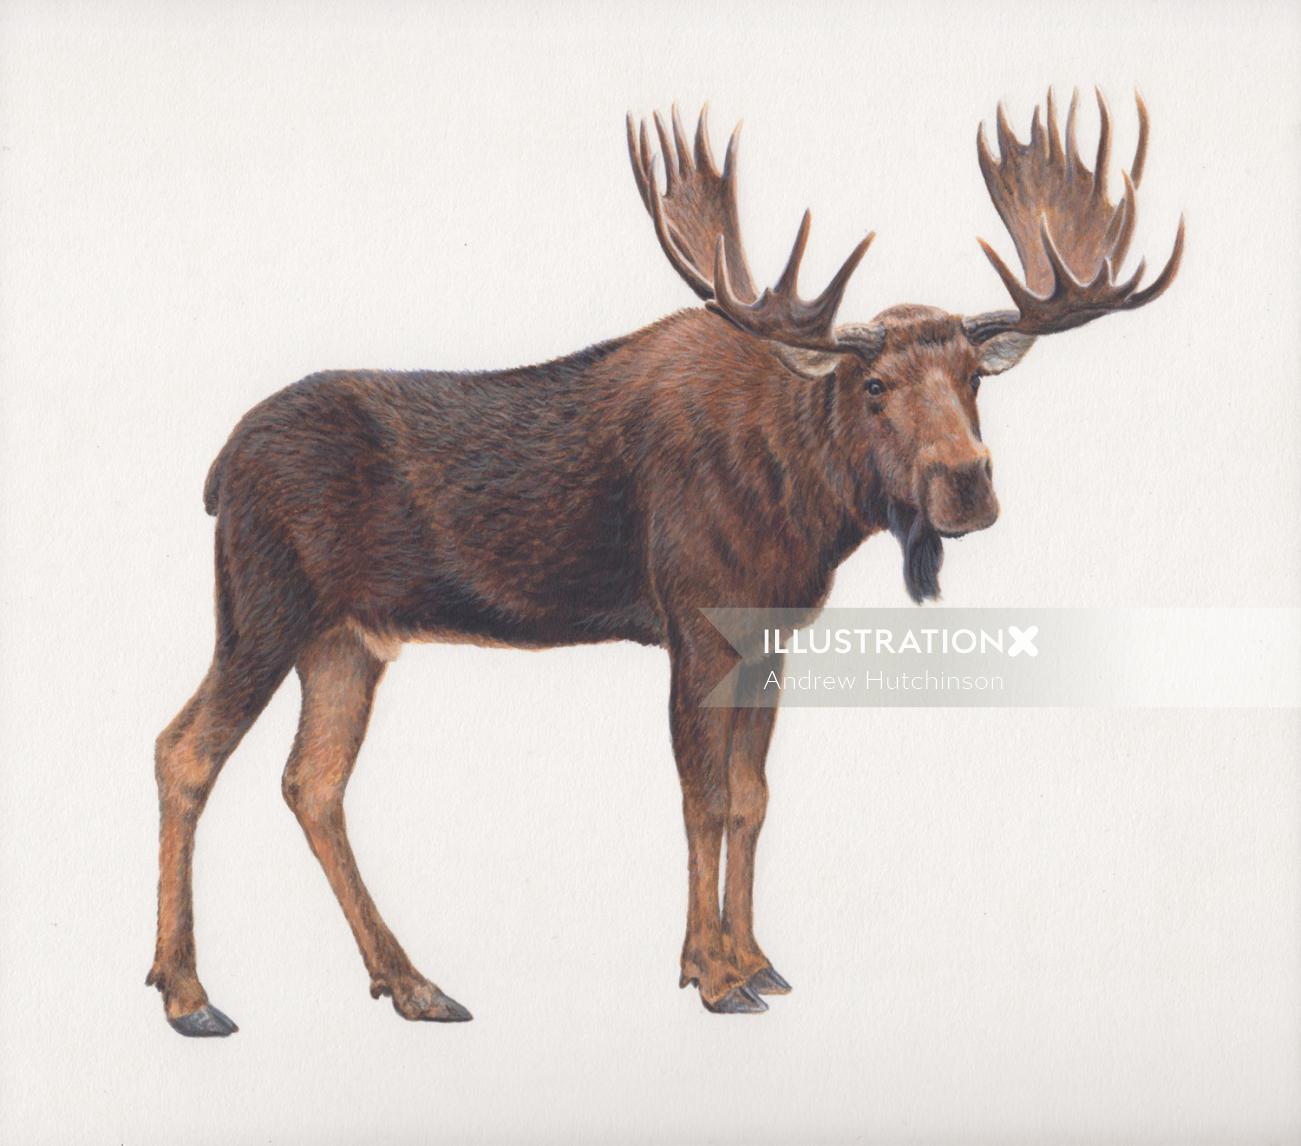 moose illustration by Andrew Hutchinson